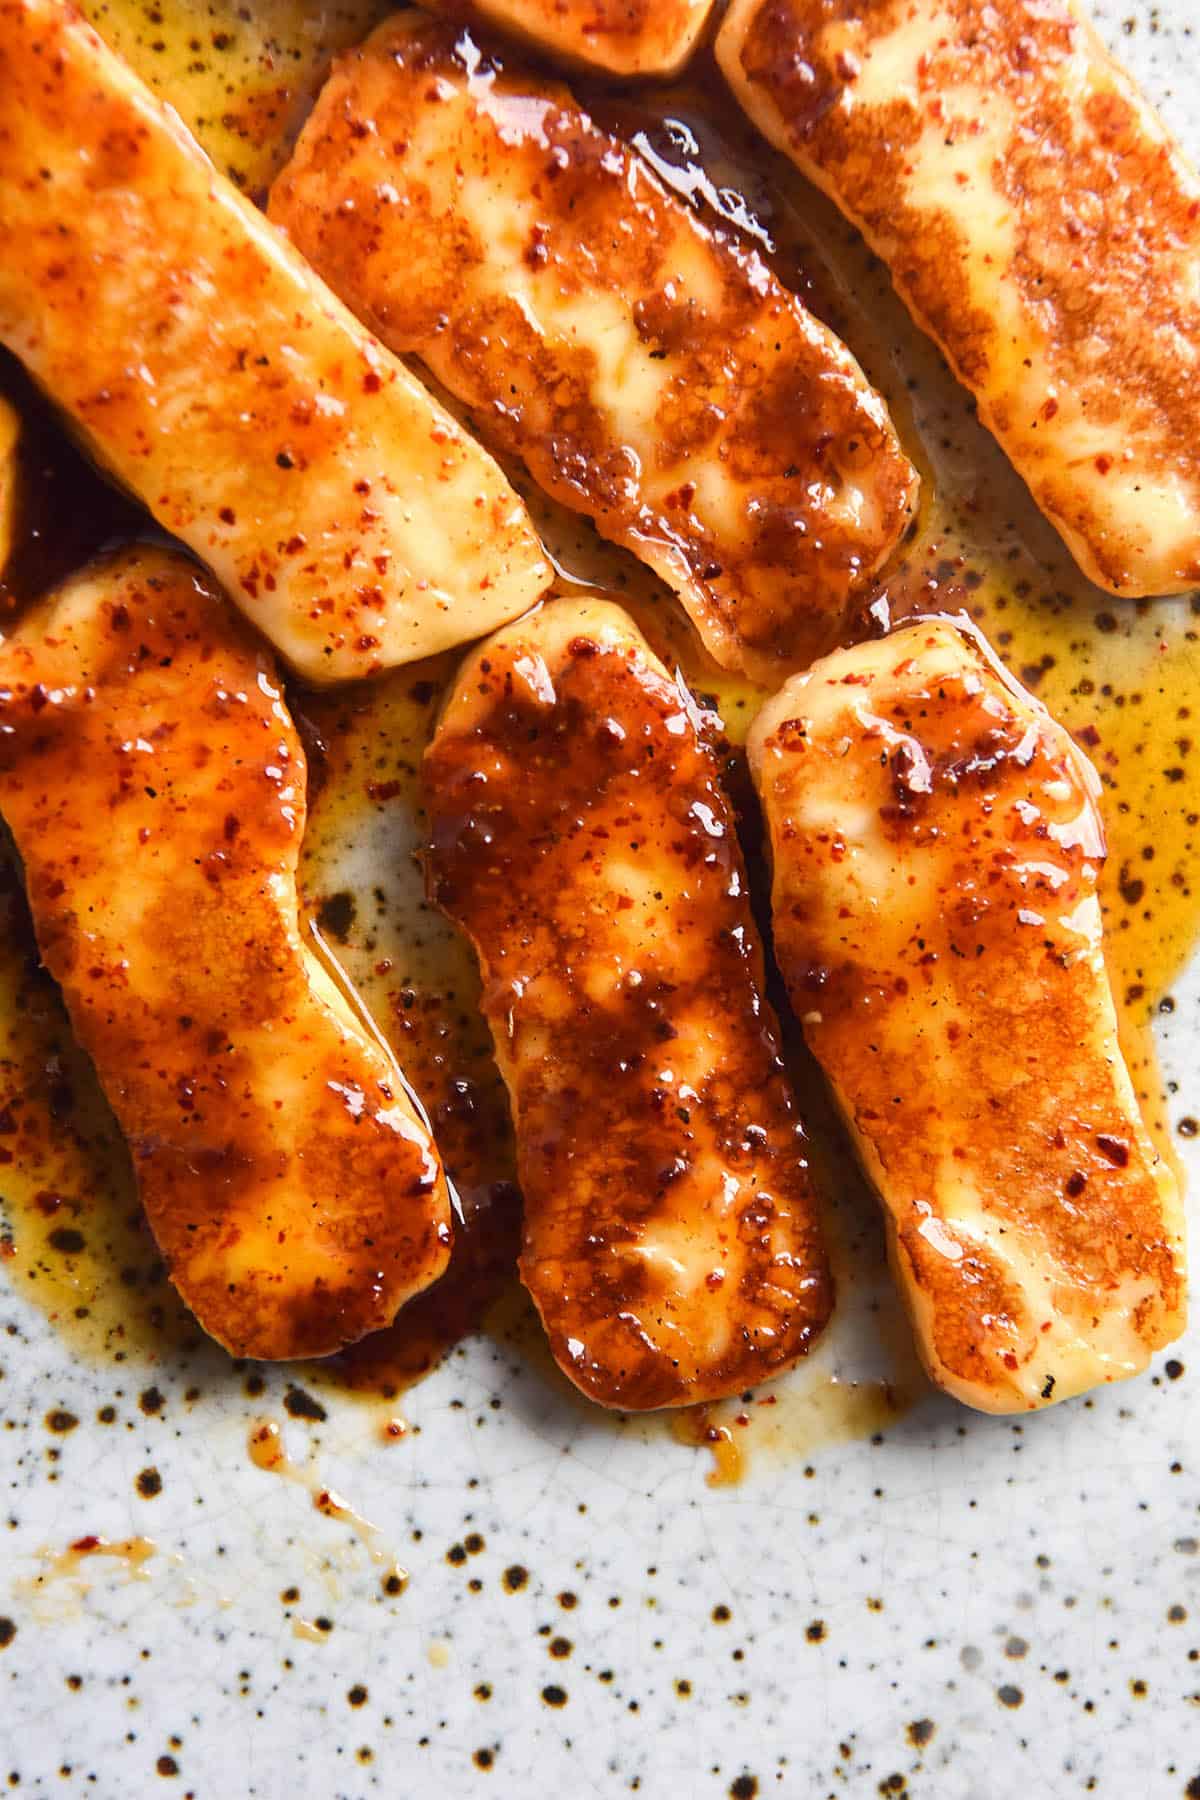 An aerial close up image of honey glazed halloumi slices on a white speckled ceramic plate